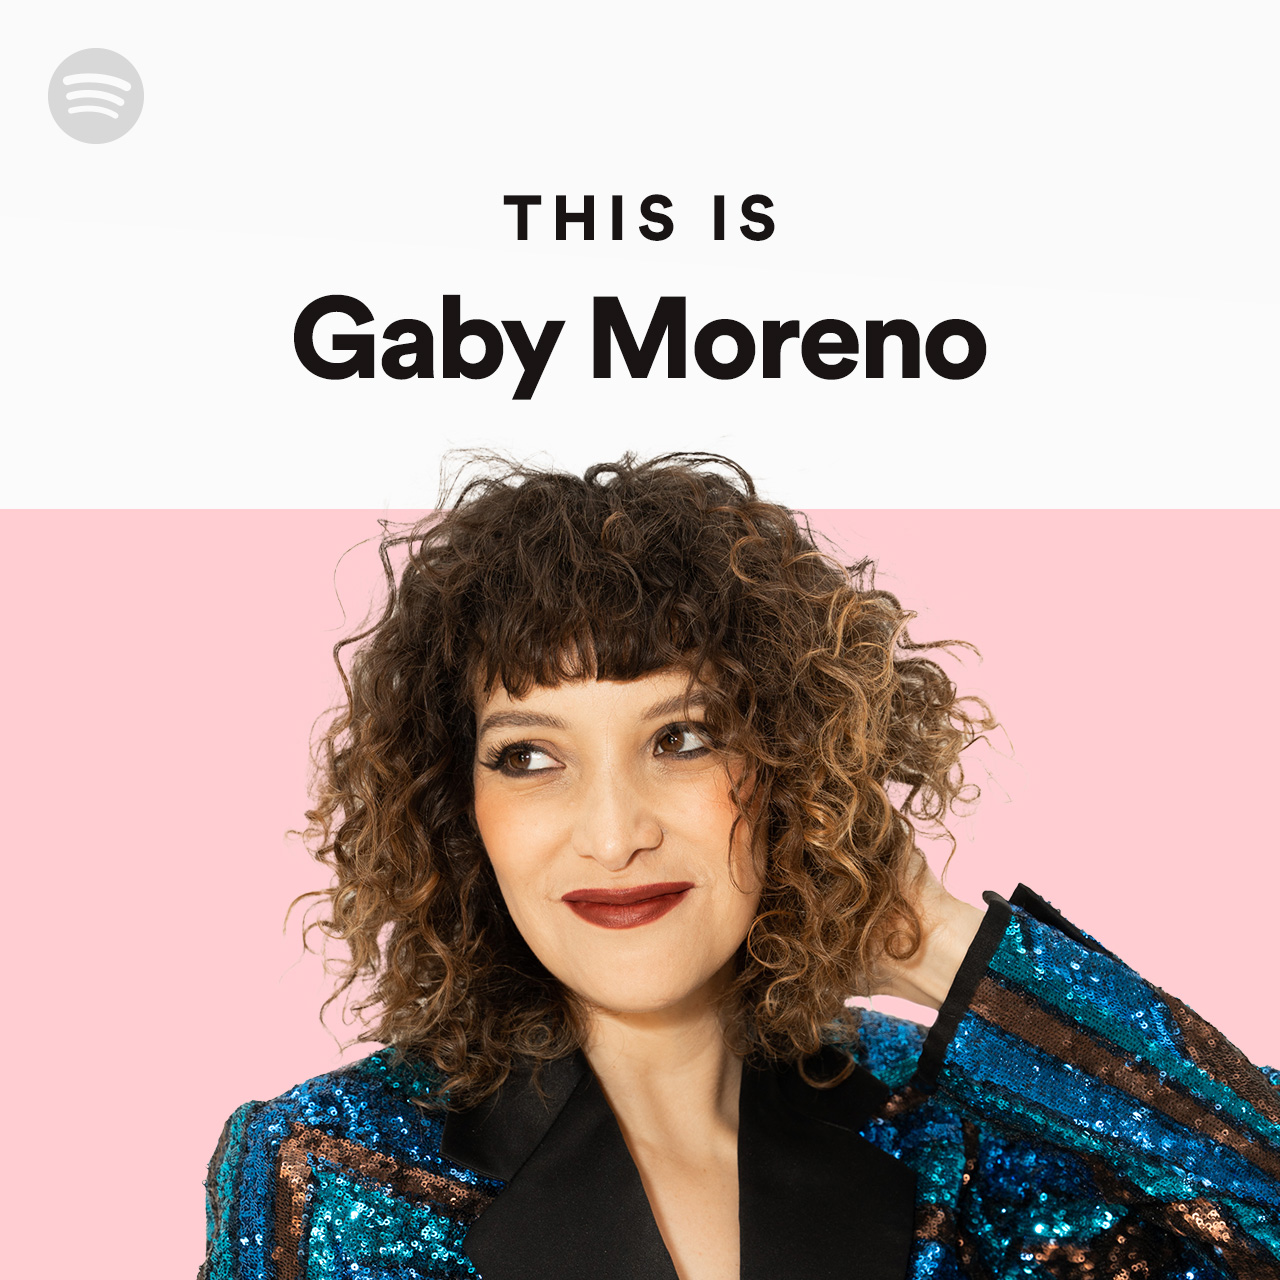 gaby moreno illustrated songs download